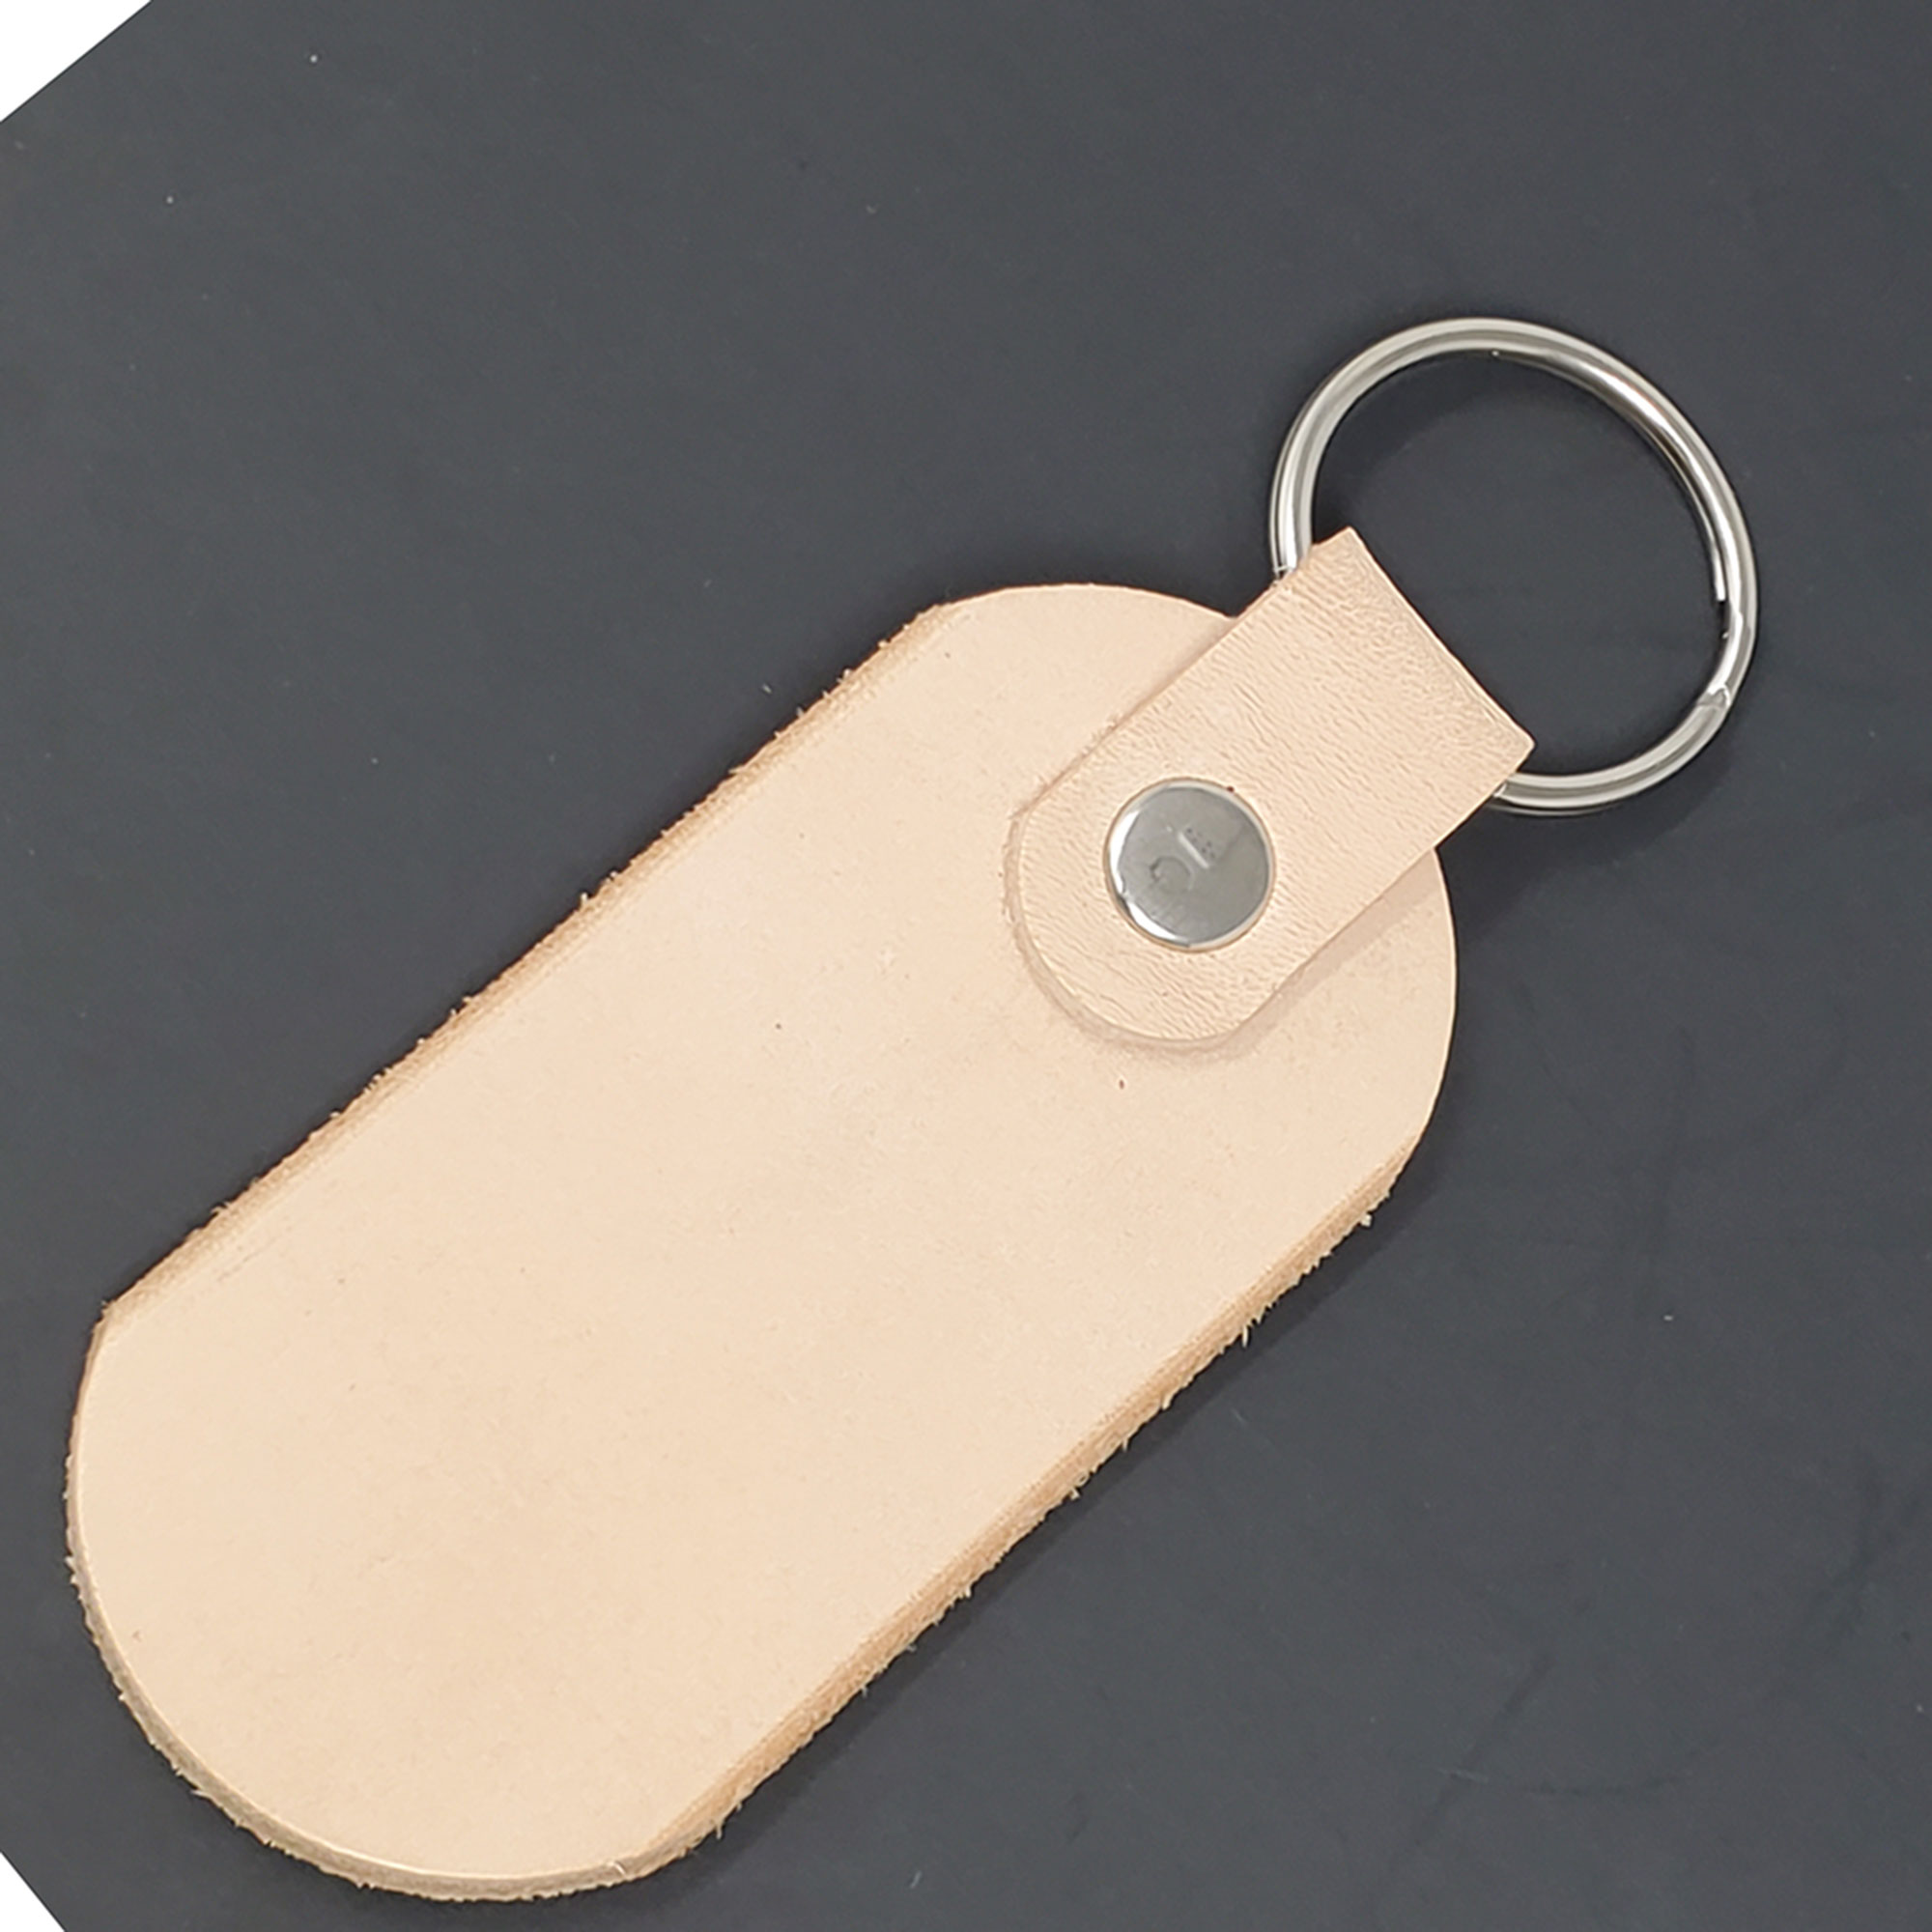 Natural Leather Keychains - 10 Pack Blank Key Fobs Kit - Leather Craft  Projects for All Ages - Tooling, Stamping Engraving Ready